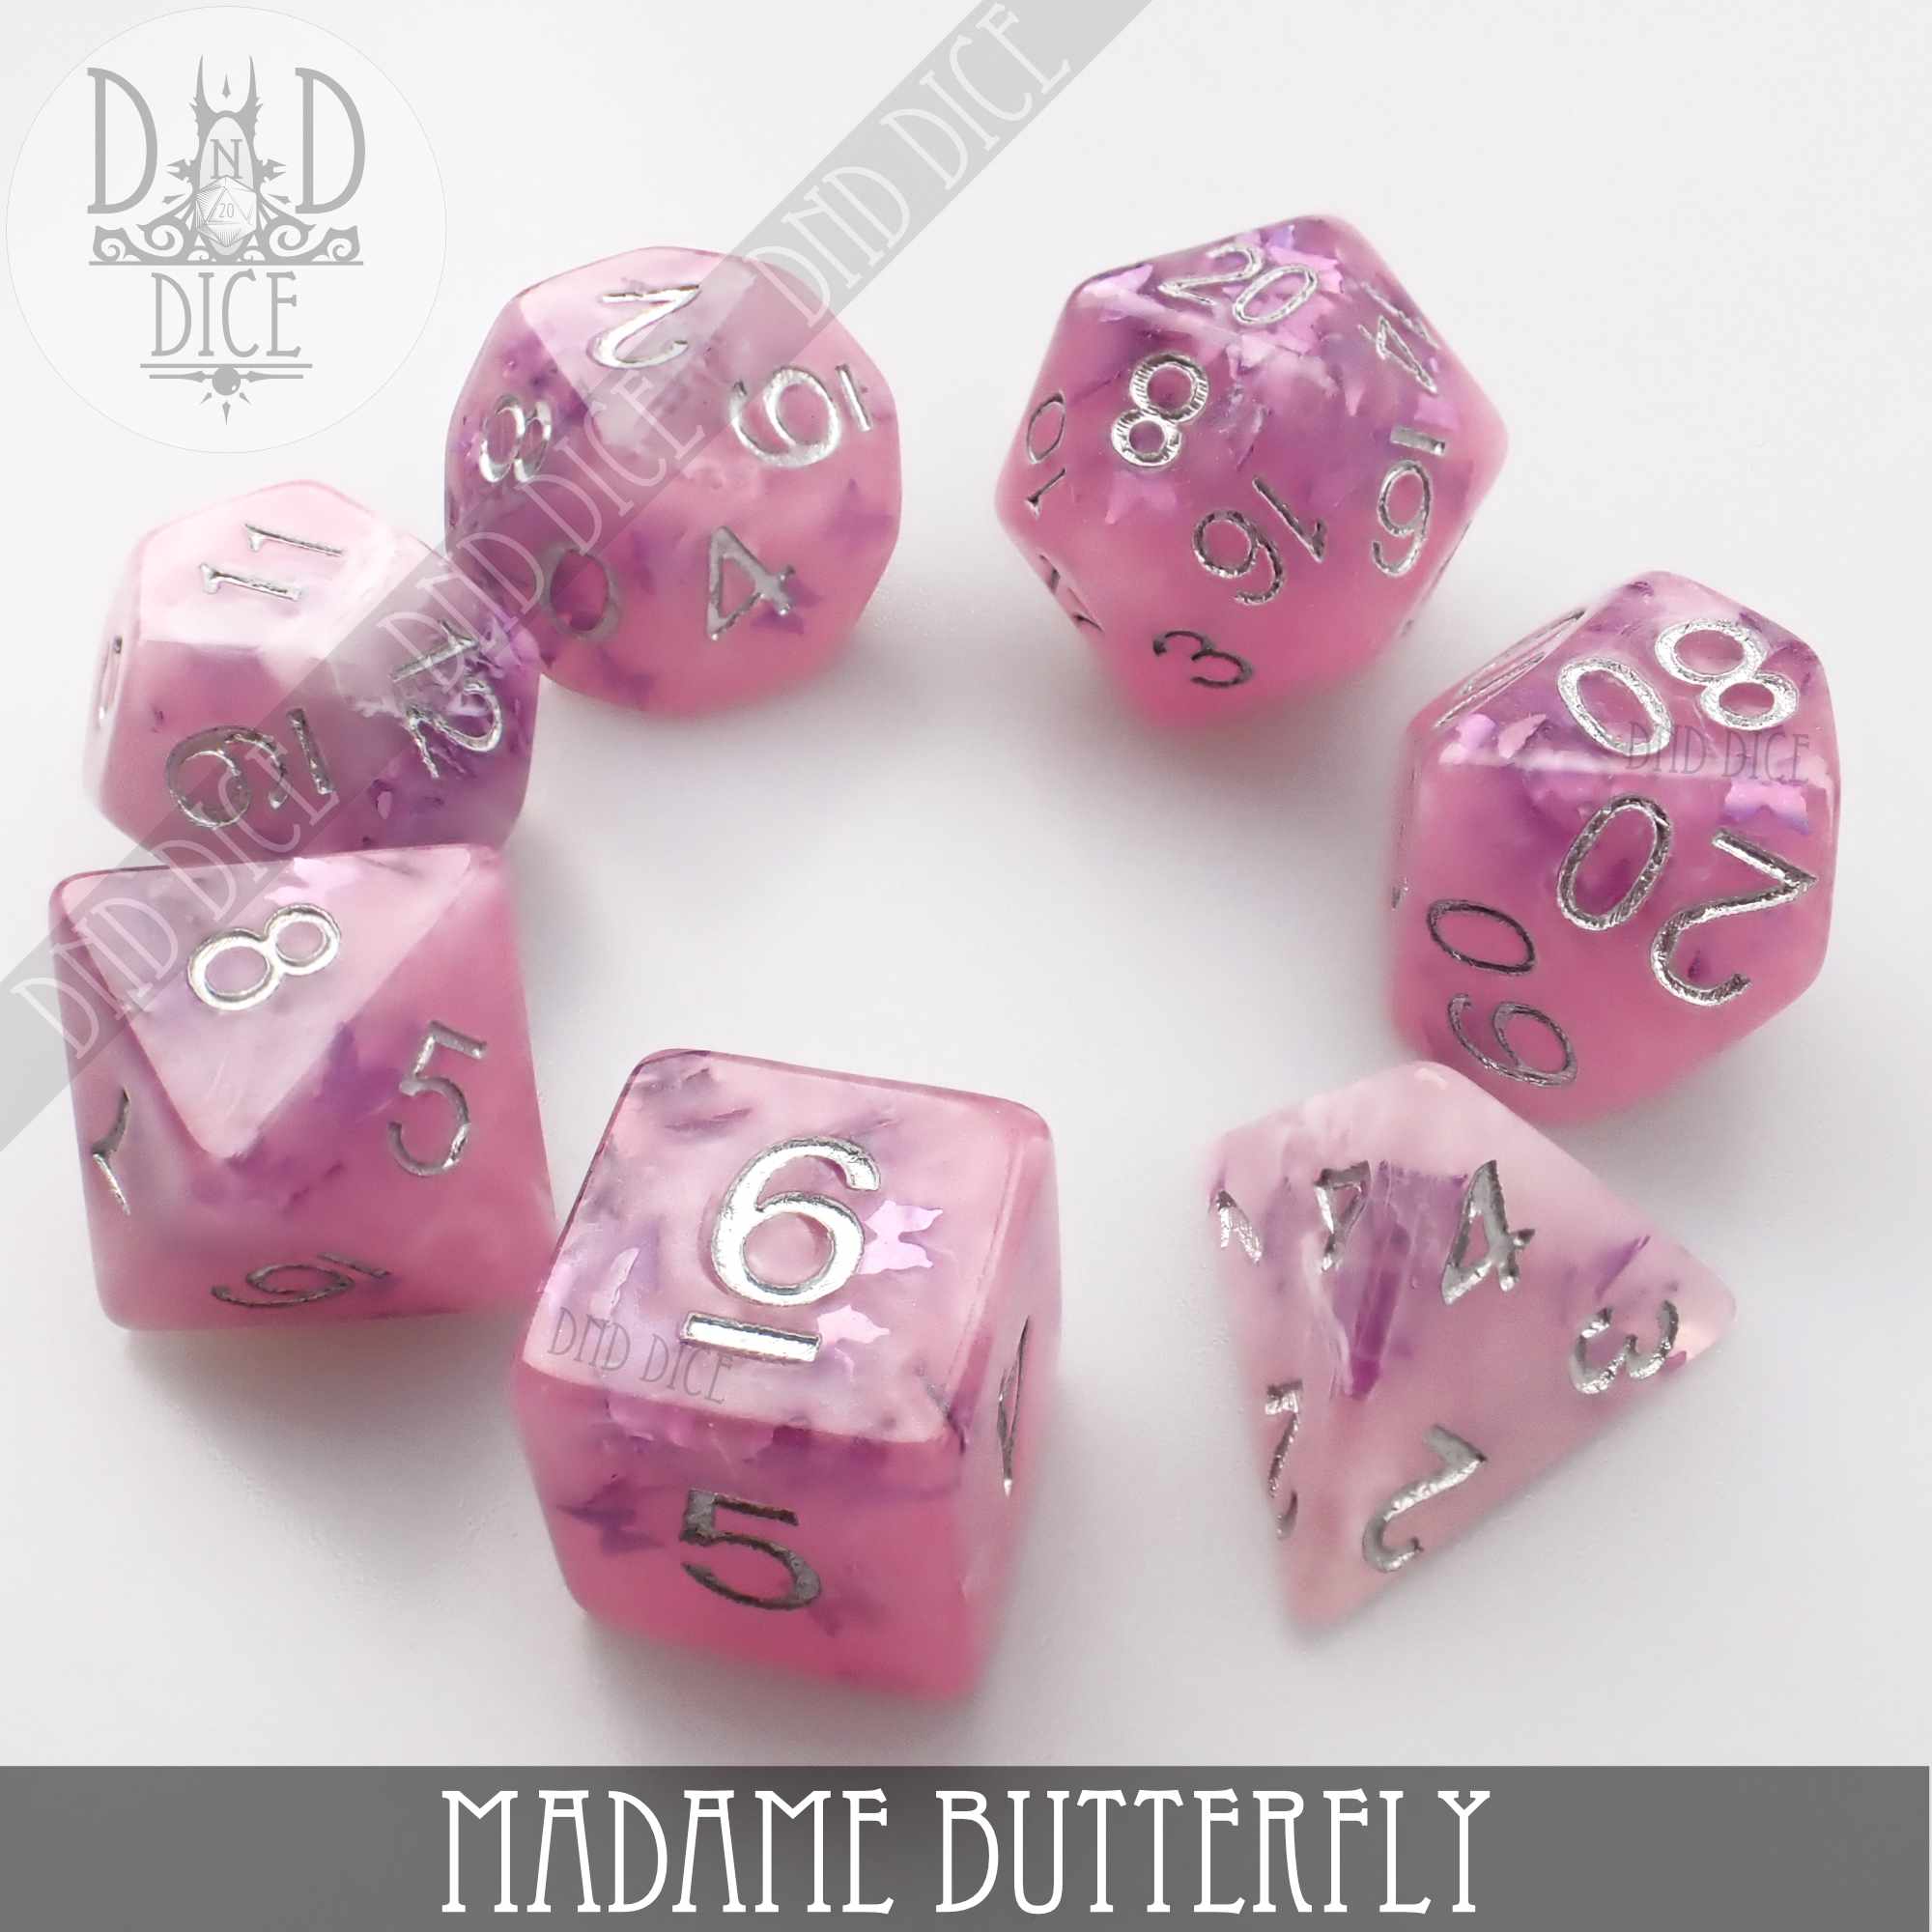 Madame Butterfly Dice Set